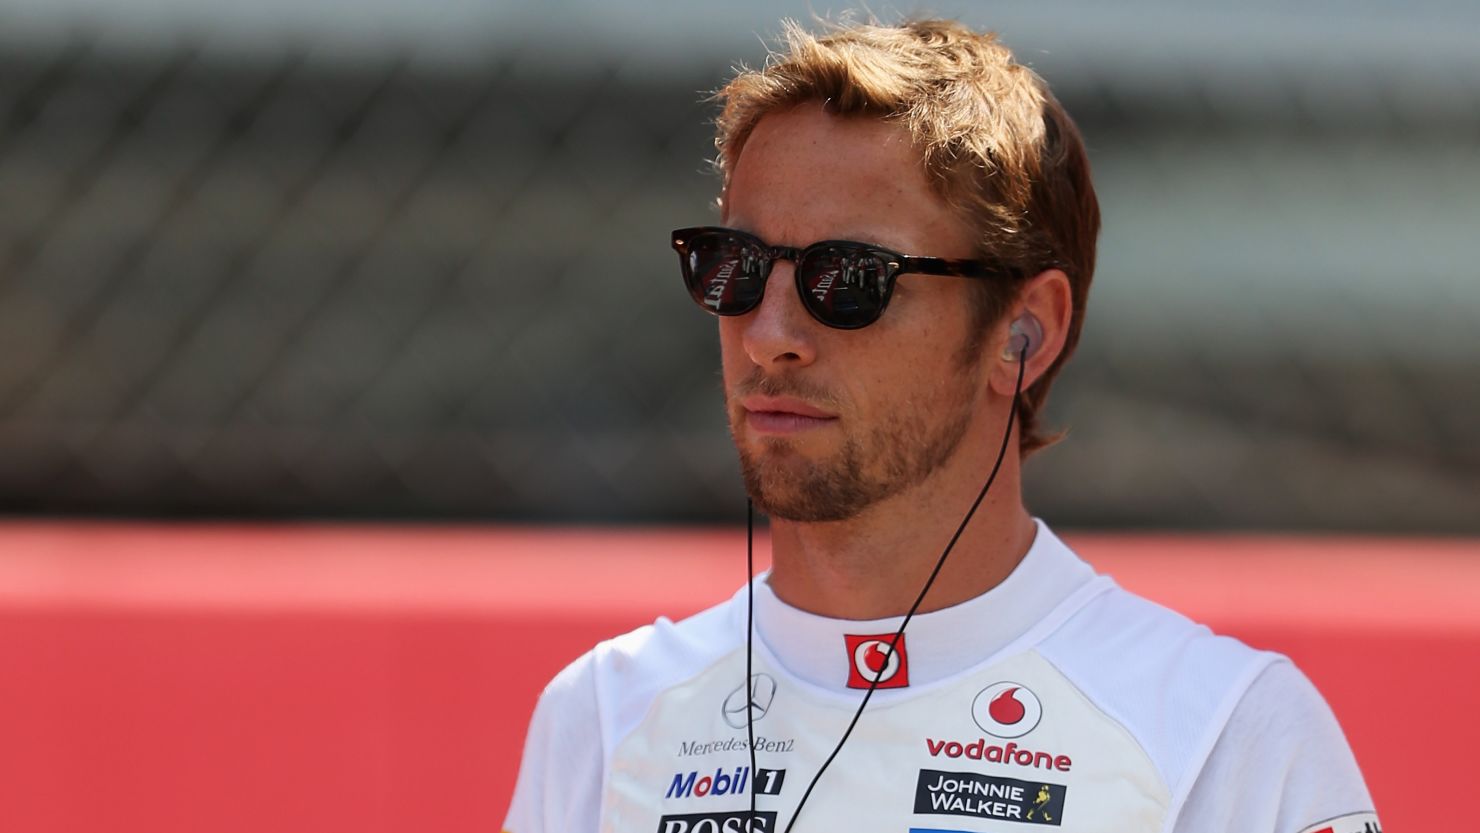 McLaren's Jenson Button won the world championship with the now defunct Brawn team in 2009.